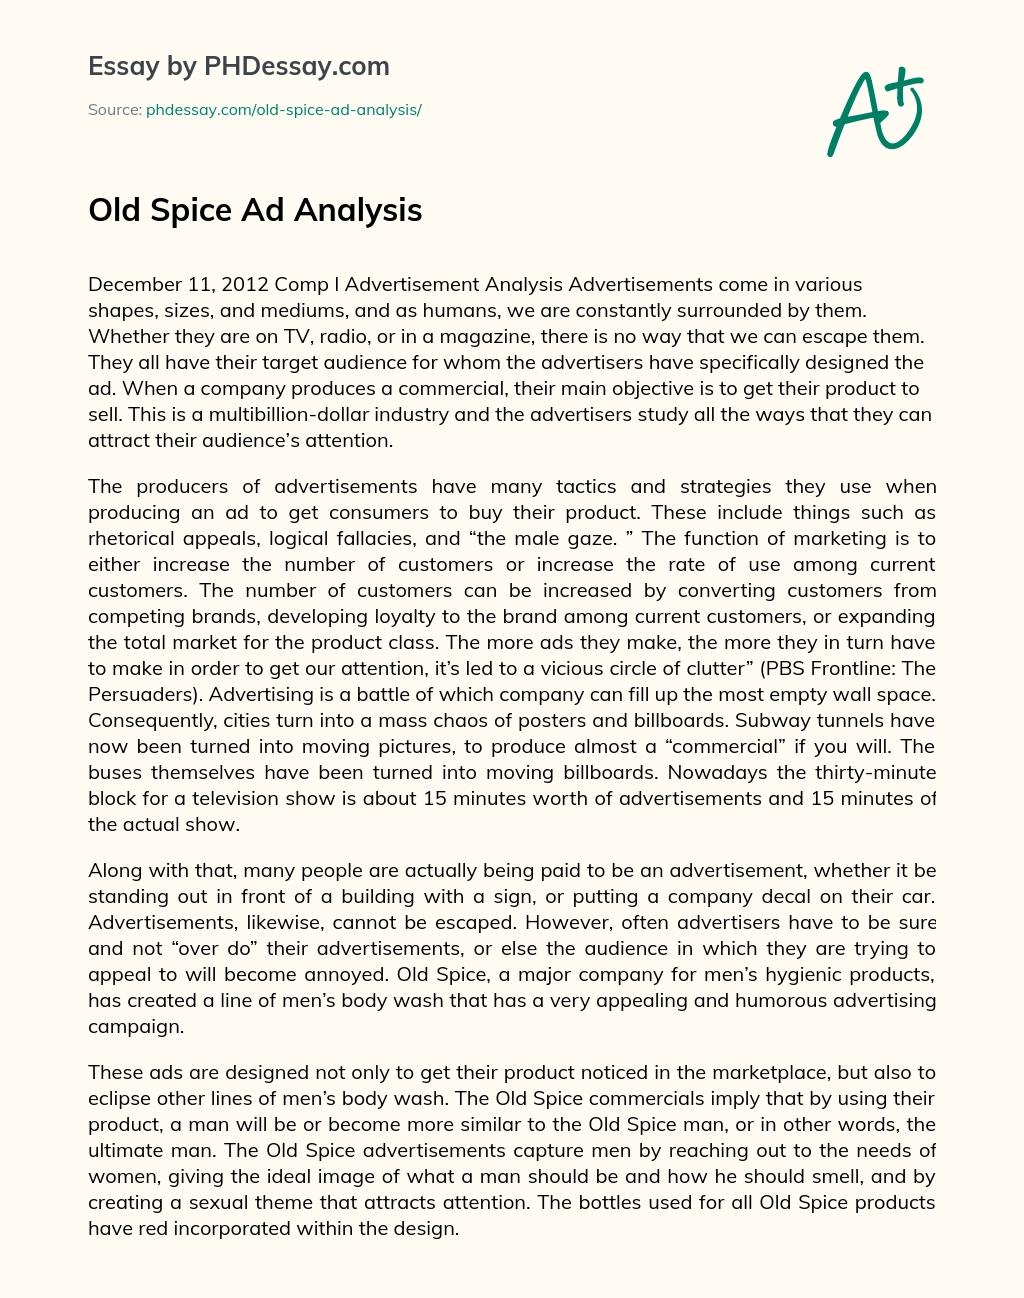 Old Spice Ad Analysis essay